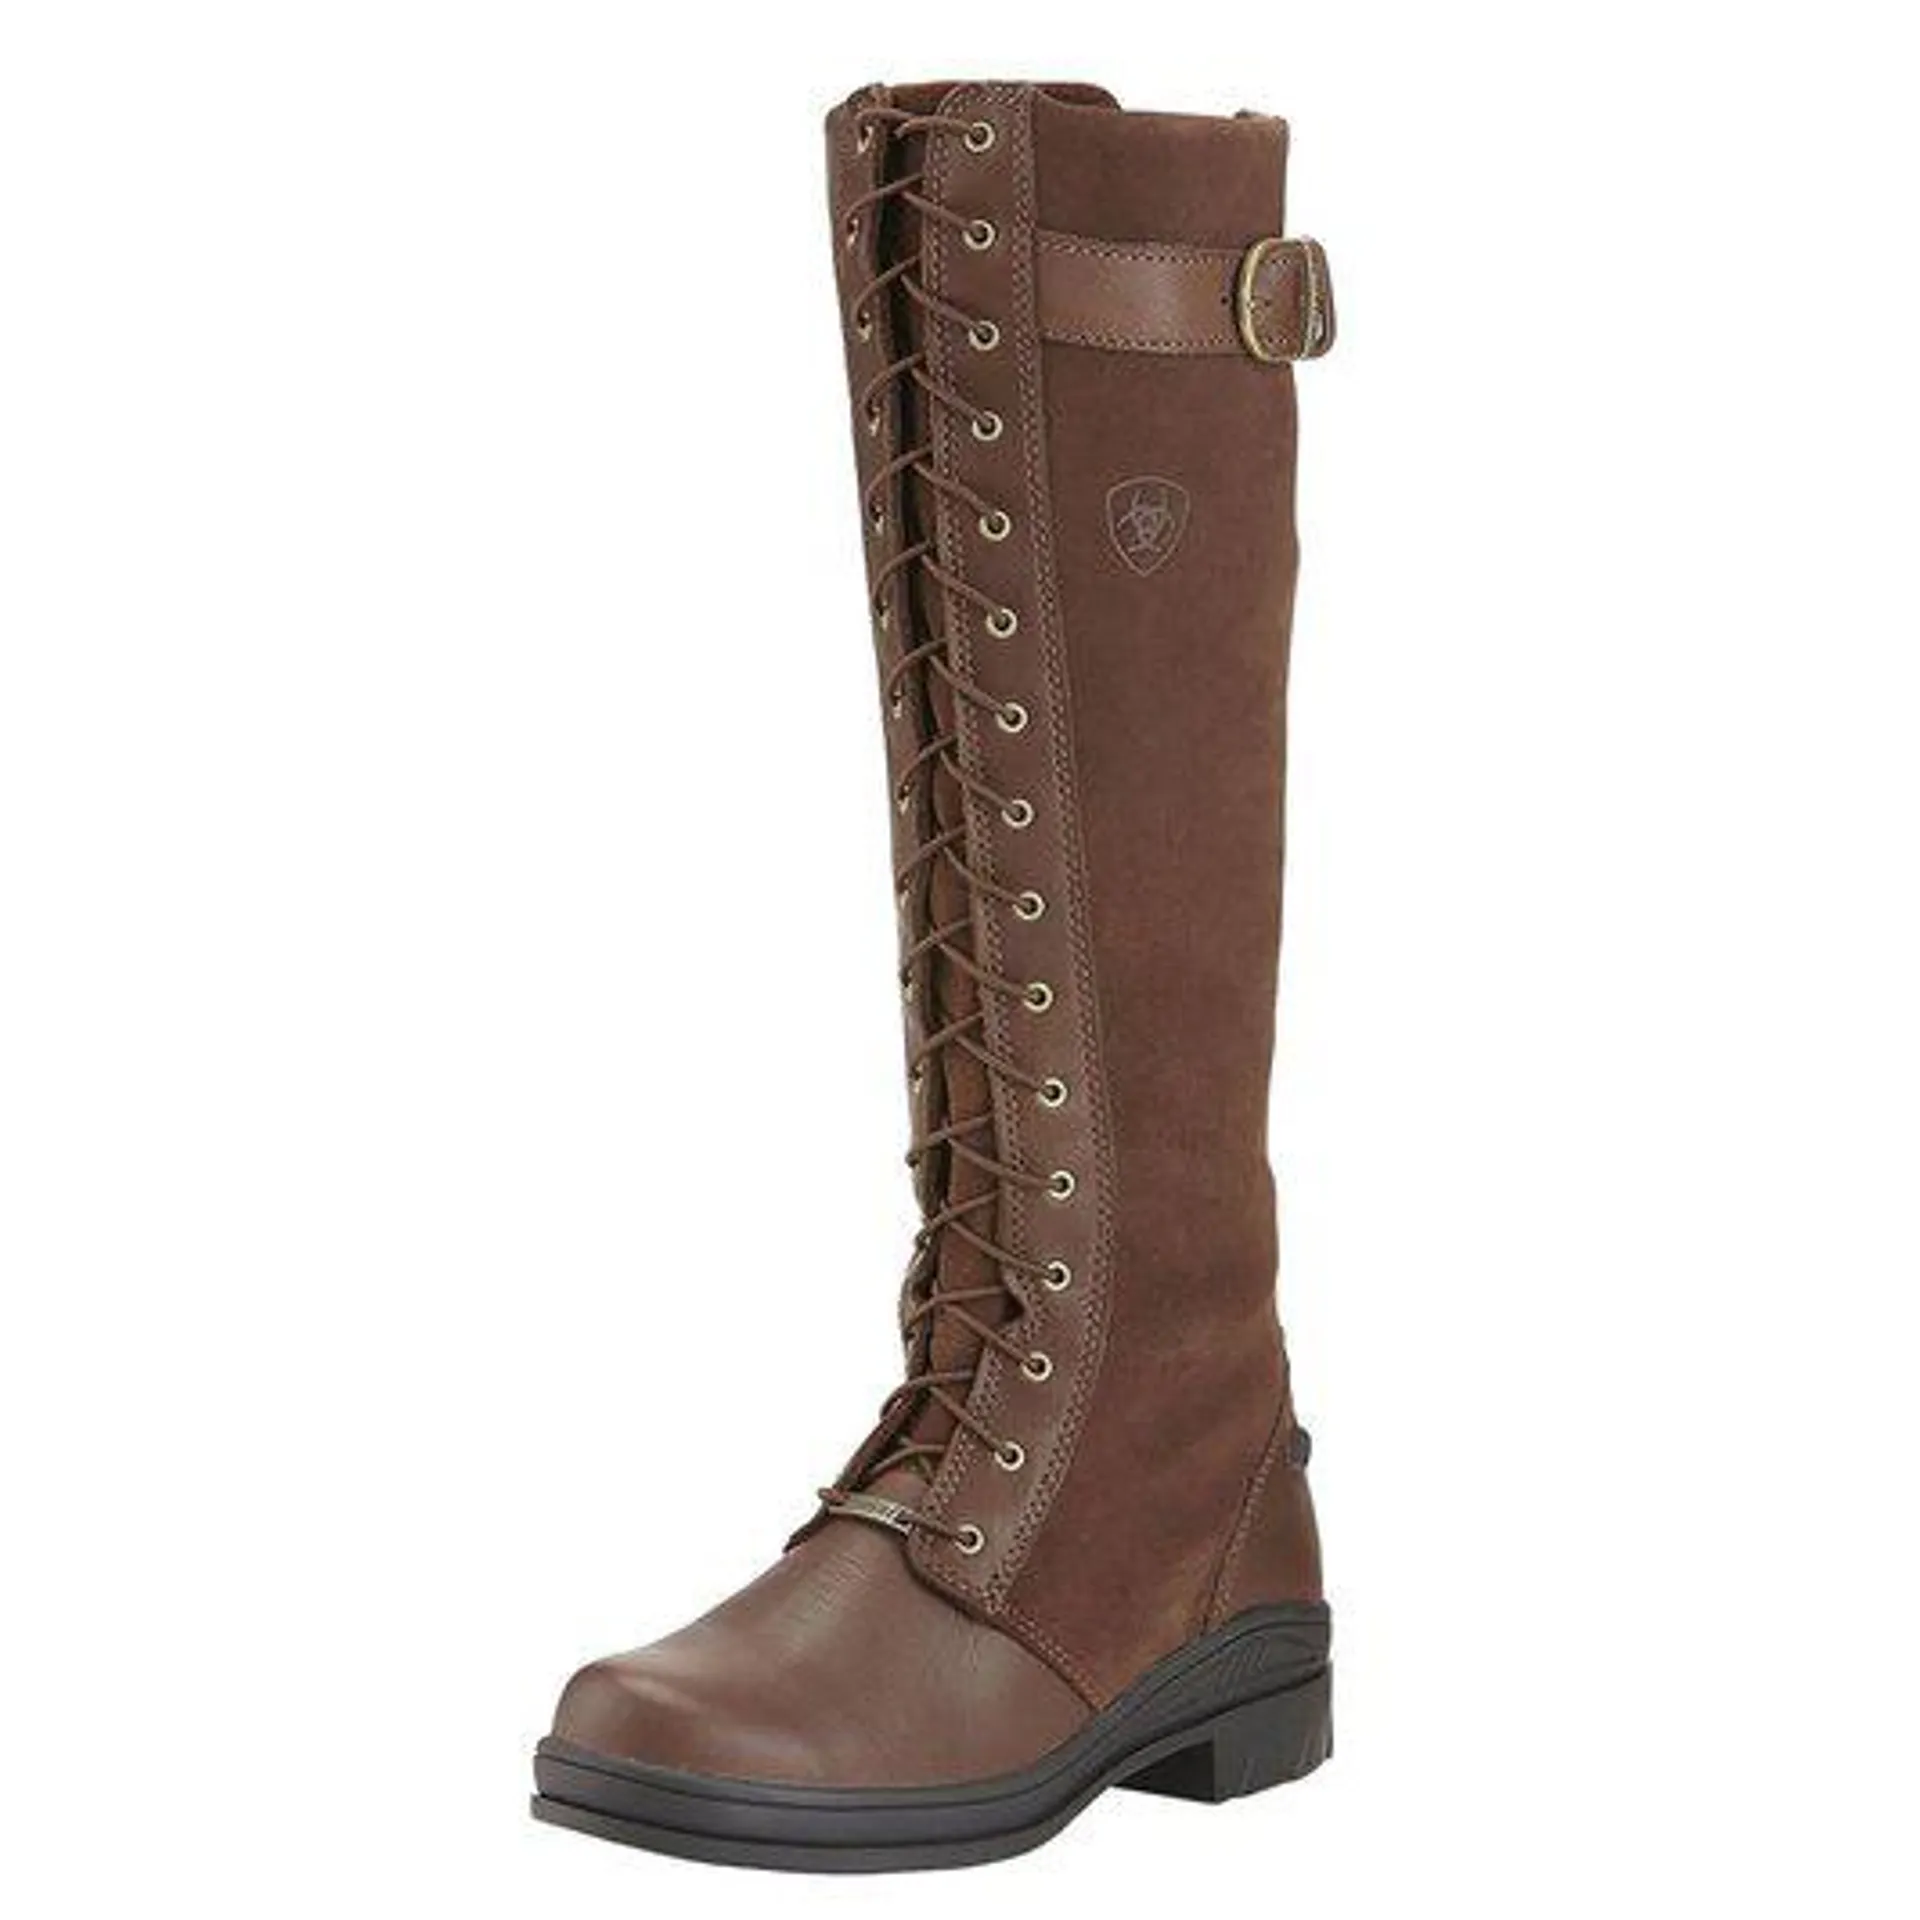 Ariat Coniston Waterproof Insulated Ladies Boots - Chocolate